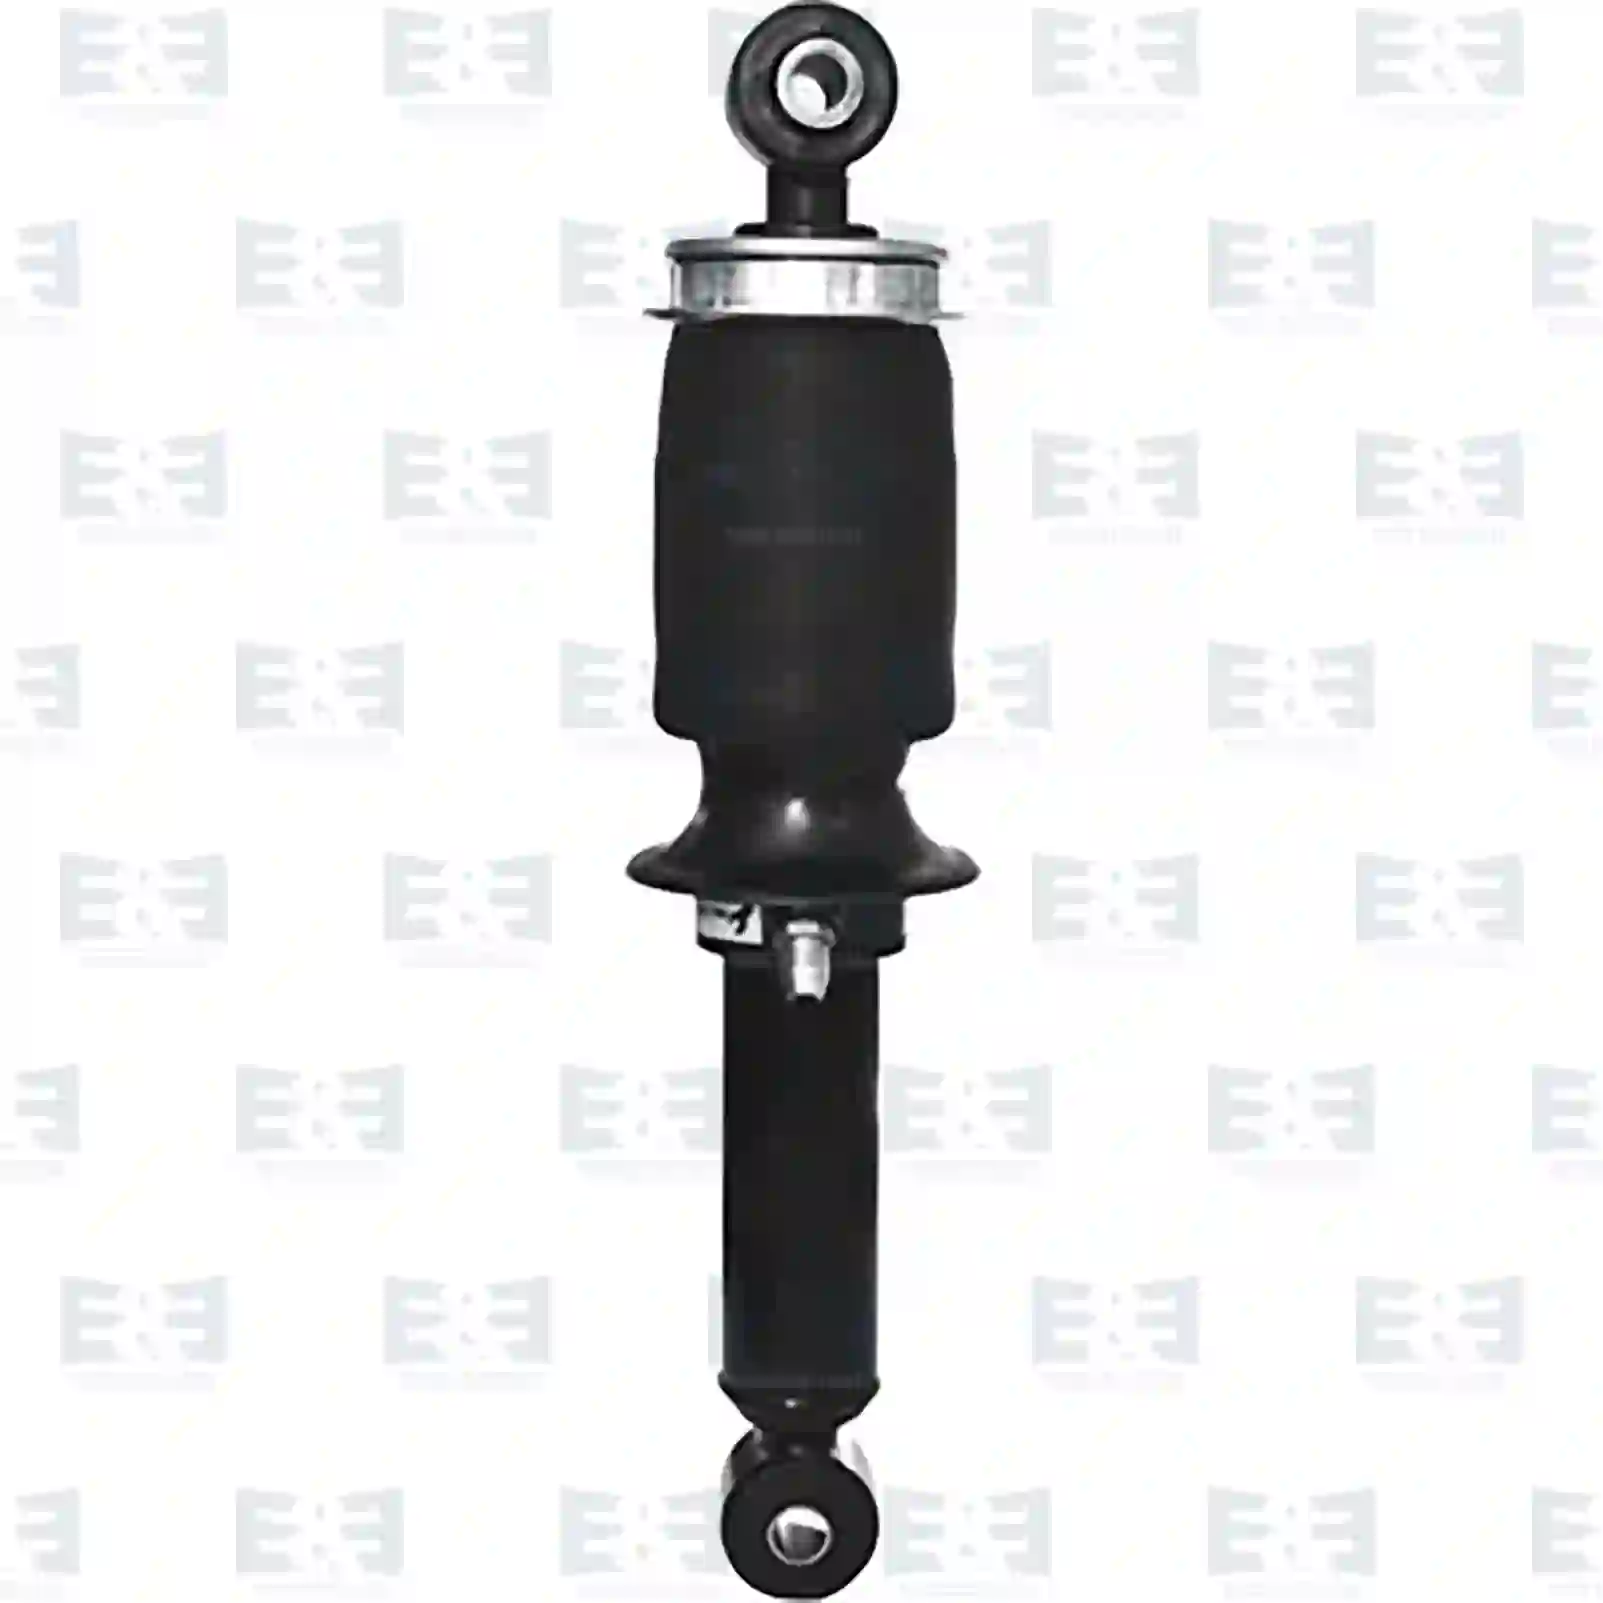 Cabin shock absorber, with air bellow, 2E2275514, 504060233, , , ||  2E2275514 E&E Truck Spare Parts | Truck Spare Parts, Auotomotive Spare Parts Cabin shock absorber, with air bellow, 2E2275514, 504060233, , , ||  2E2275514 E&E Truck Spare Parts | Truck Spare Parts, Auotomotive Spare Parts